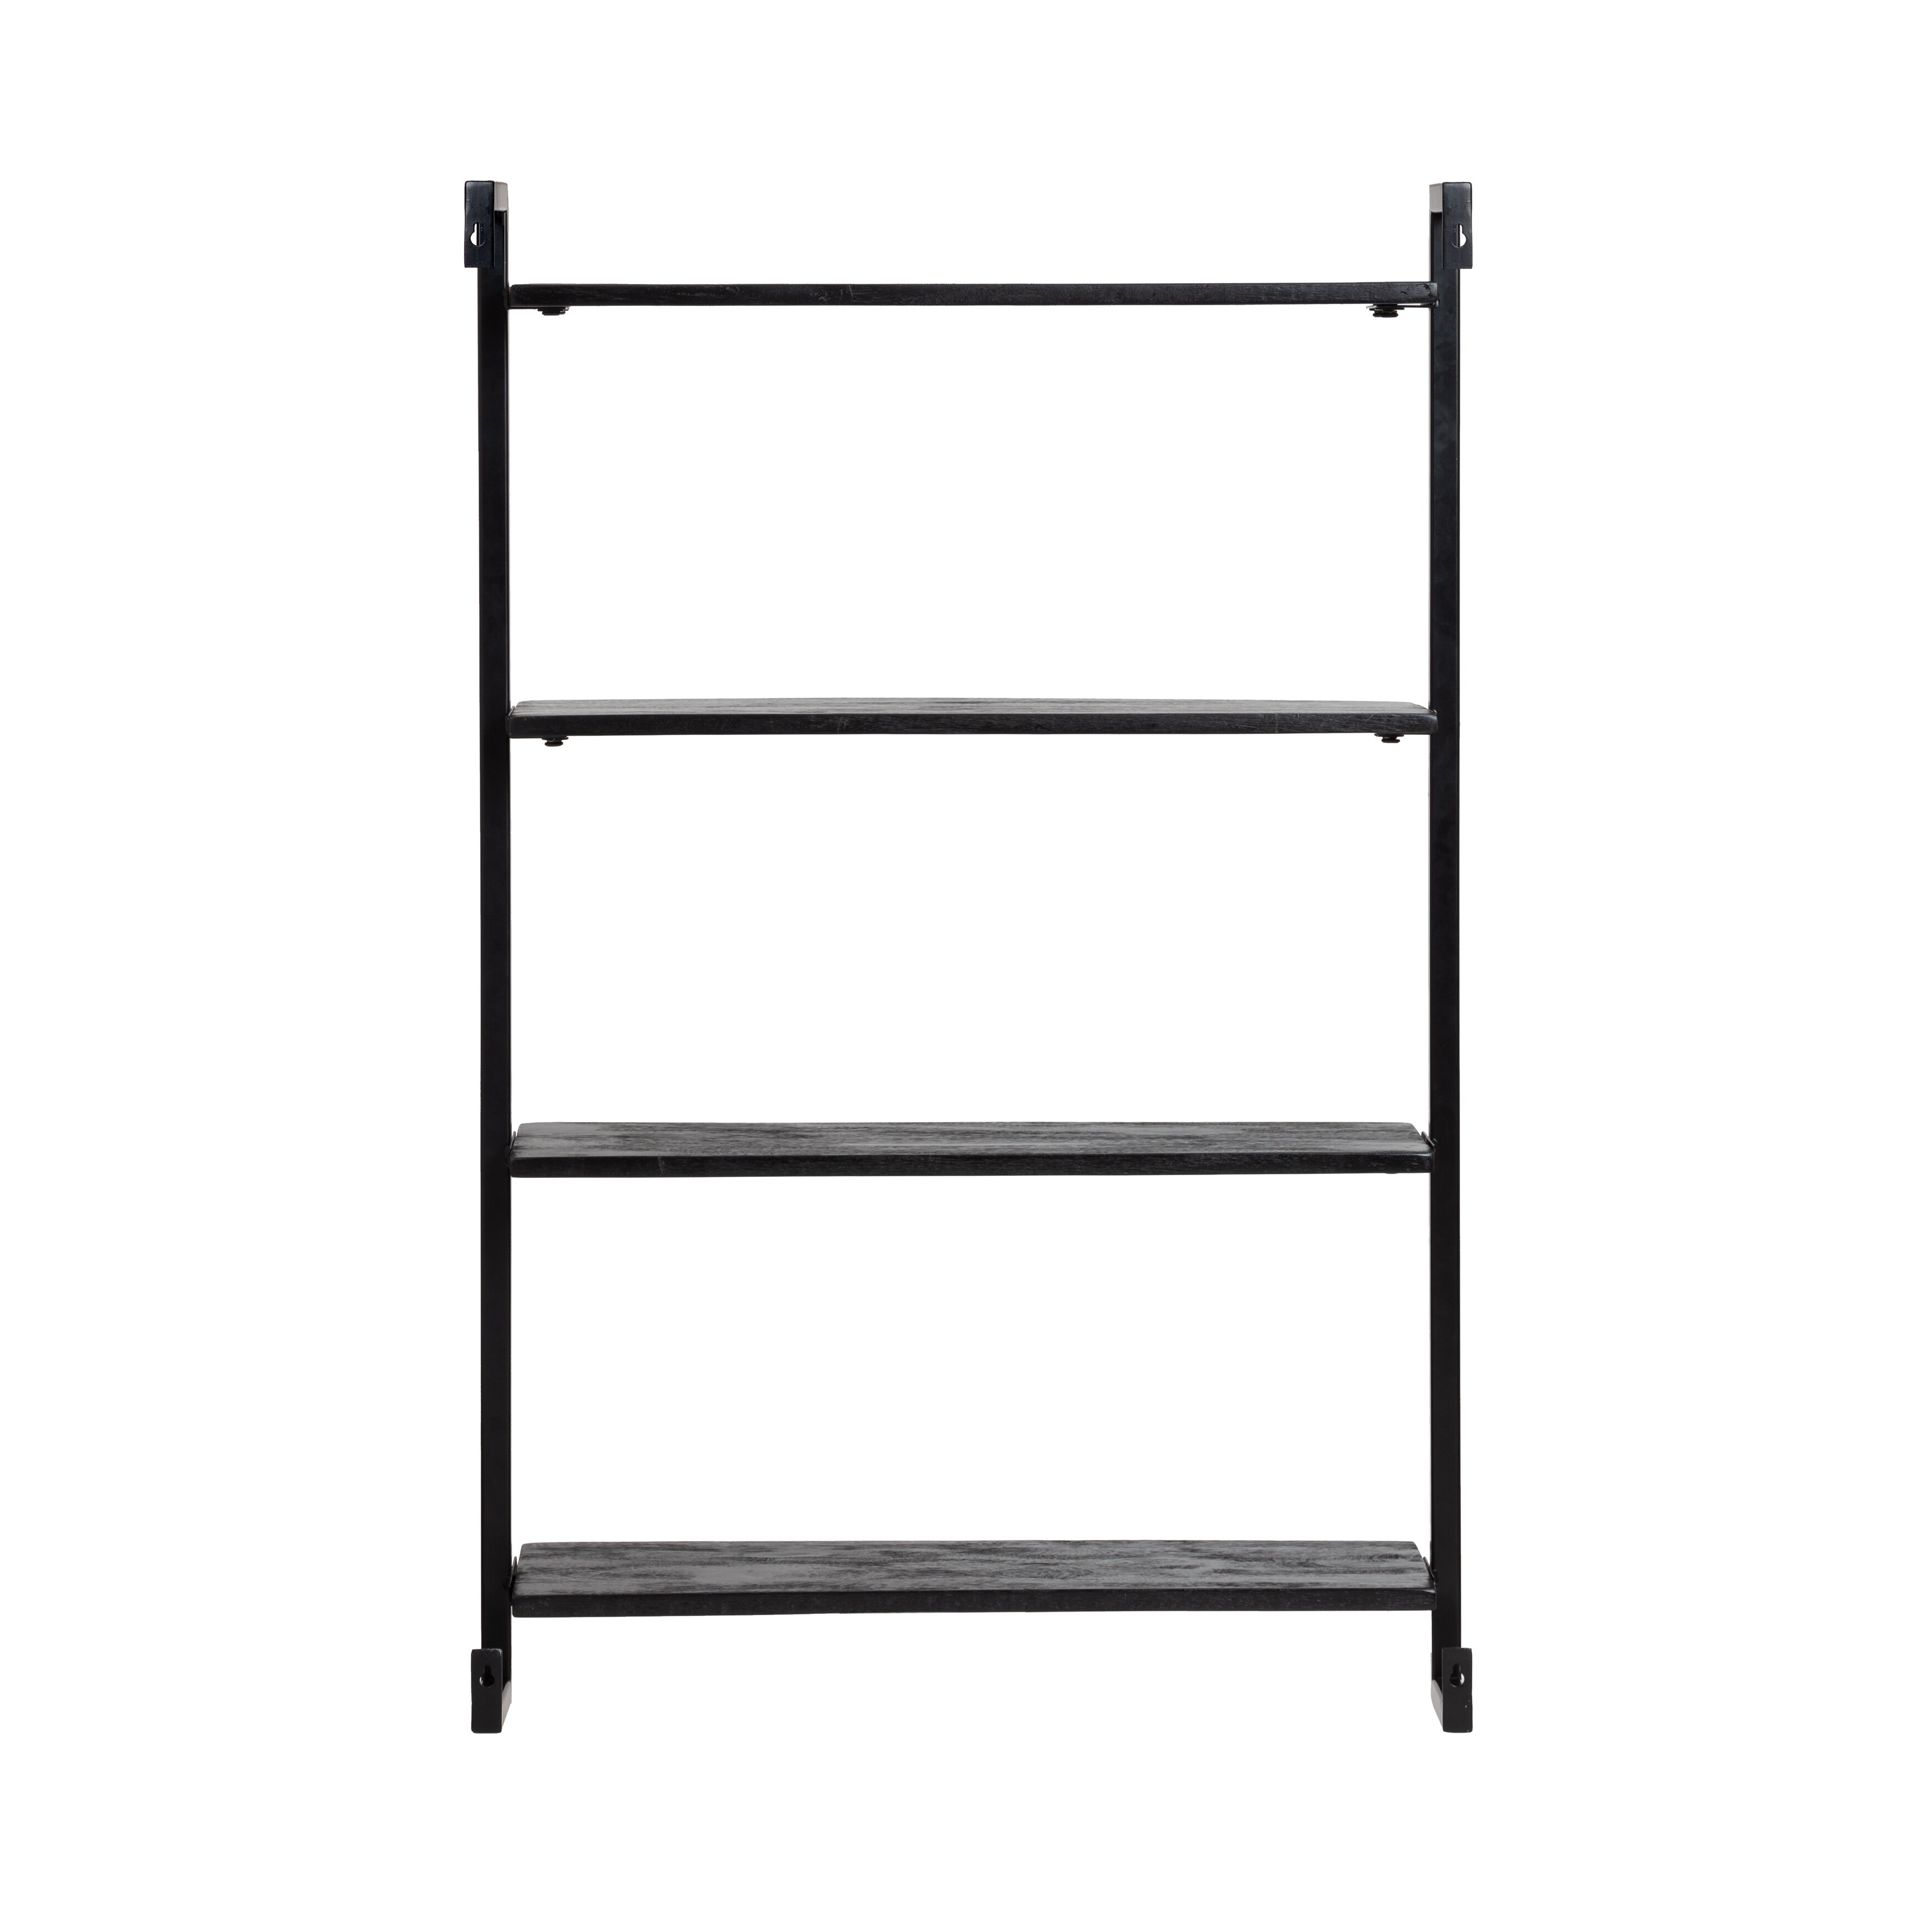 https://ak1.ostkcdn.com/images/products/is/images/direct/be73bf5c066336f9050532360b070c94651a0f21/Phantom-Wall-Mounted-Shelves---40%27-X-26%27.jpg